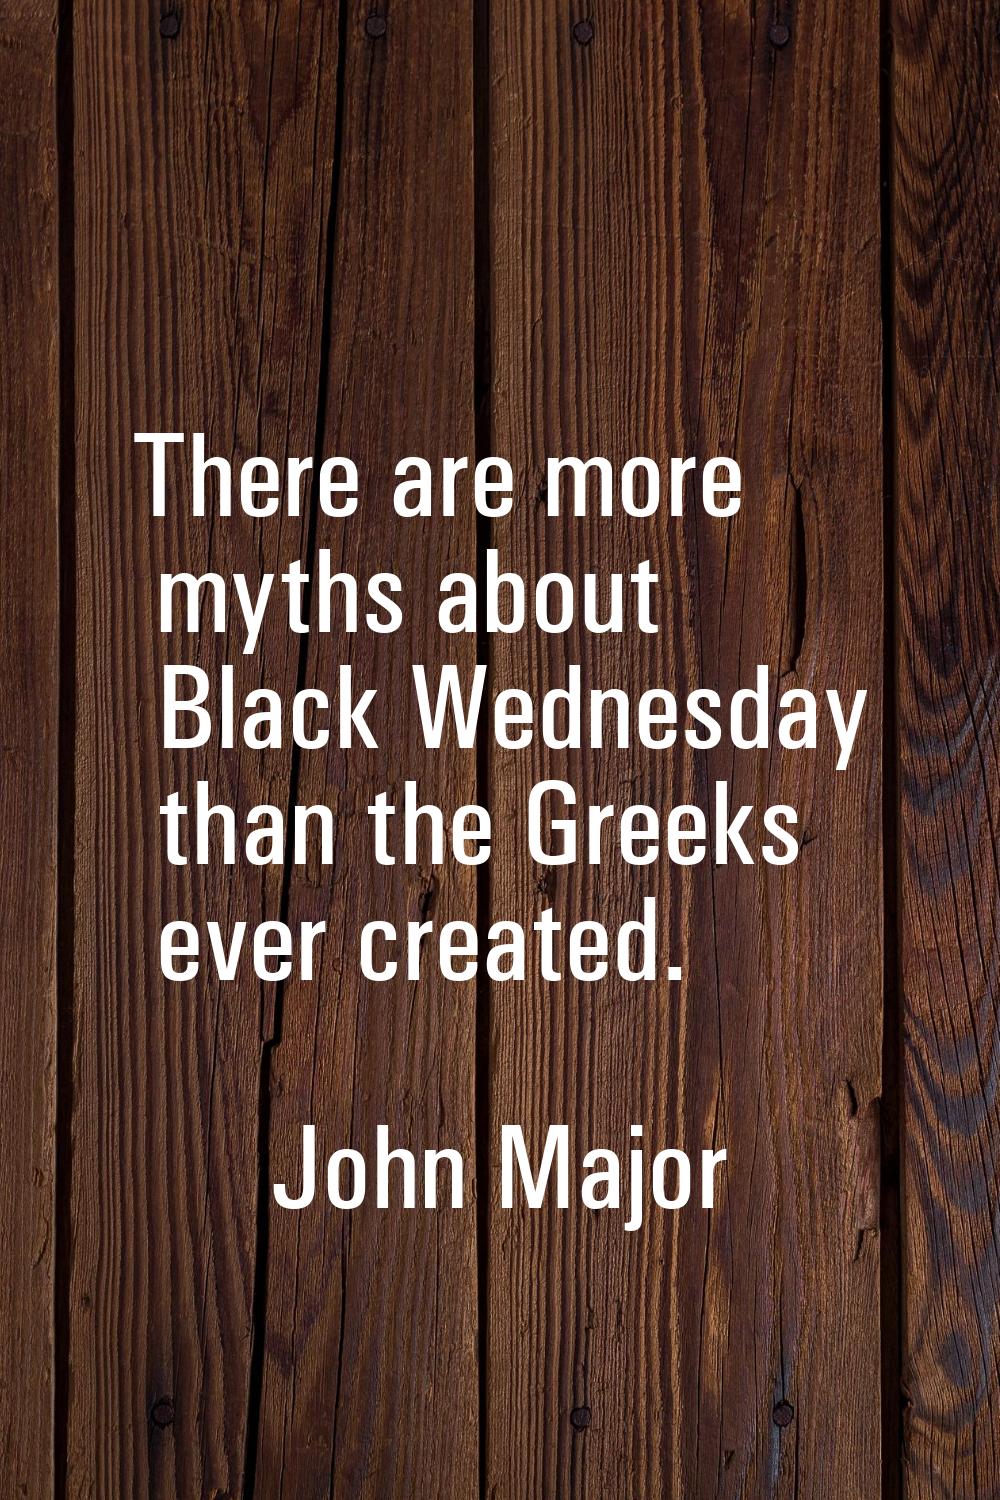 There are more myths about Black Wednesday than the Greeks ever created.